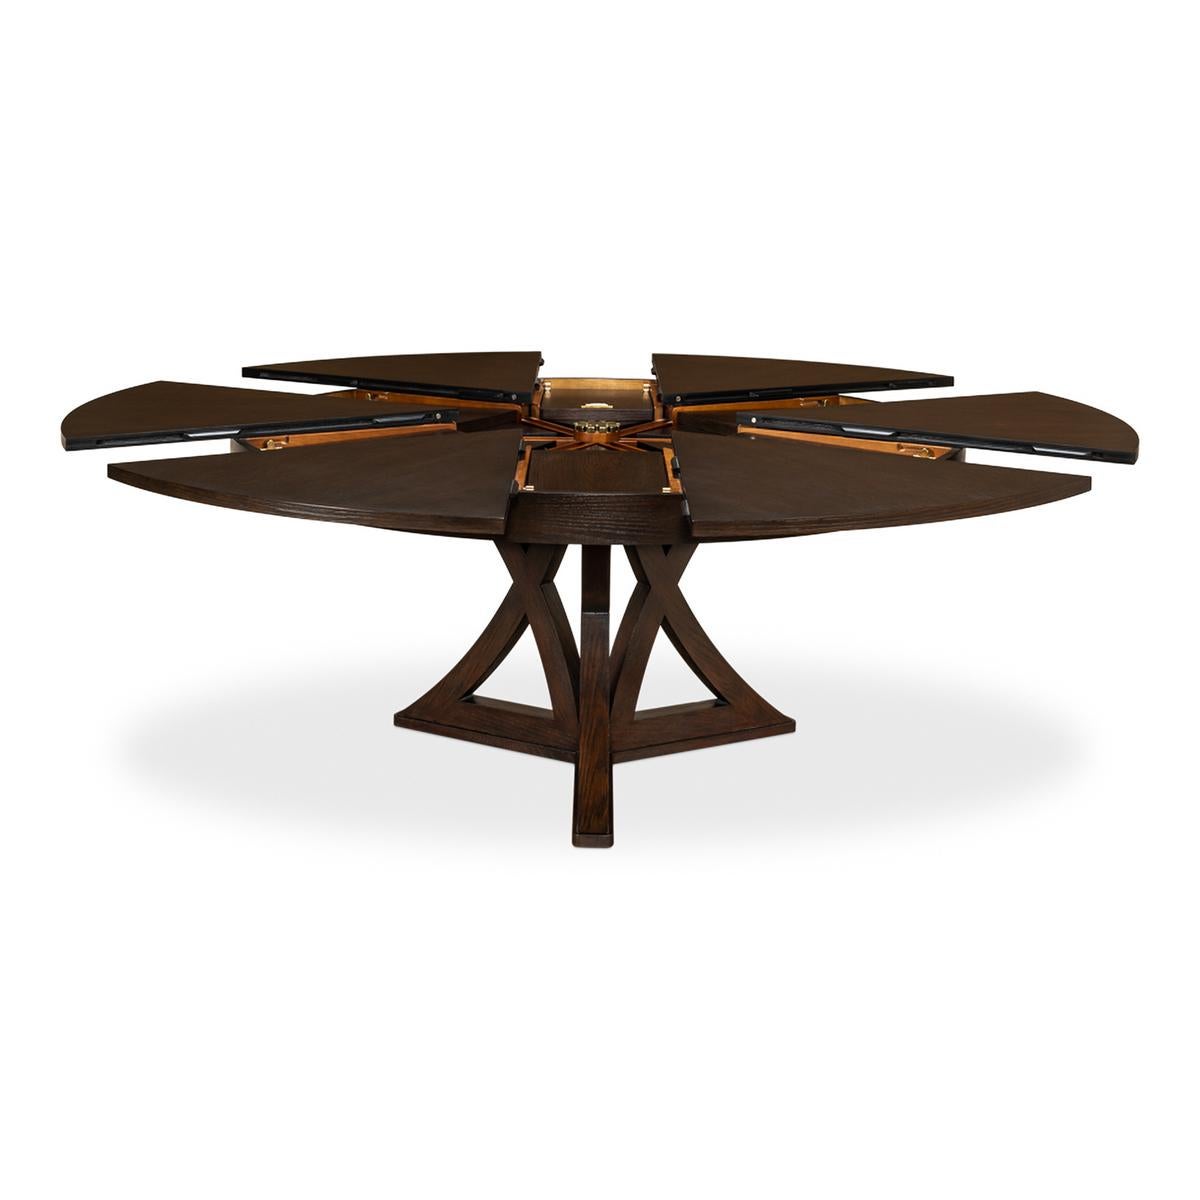 72 inch round extendable dining table